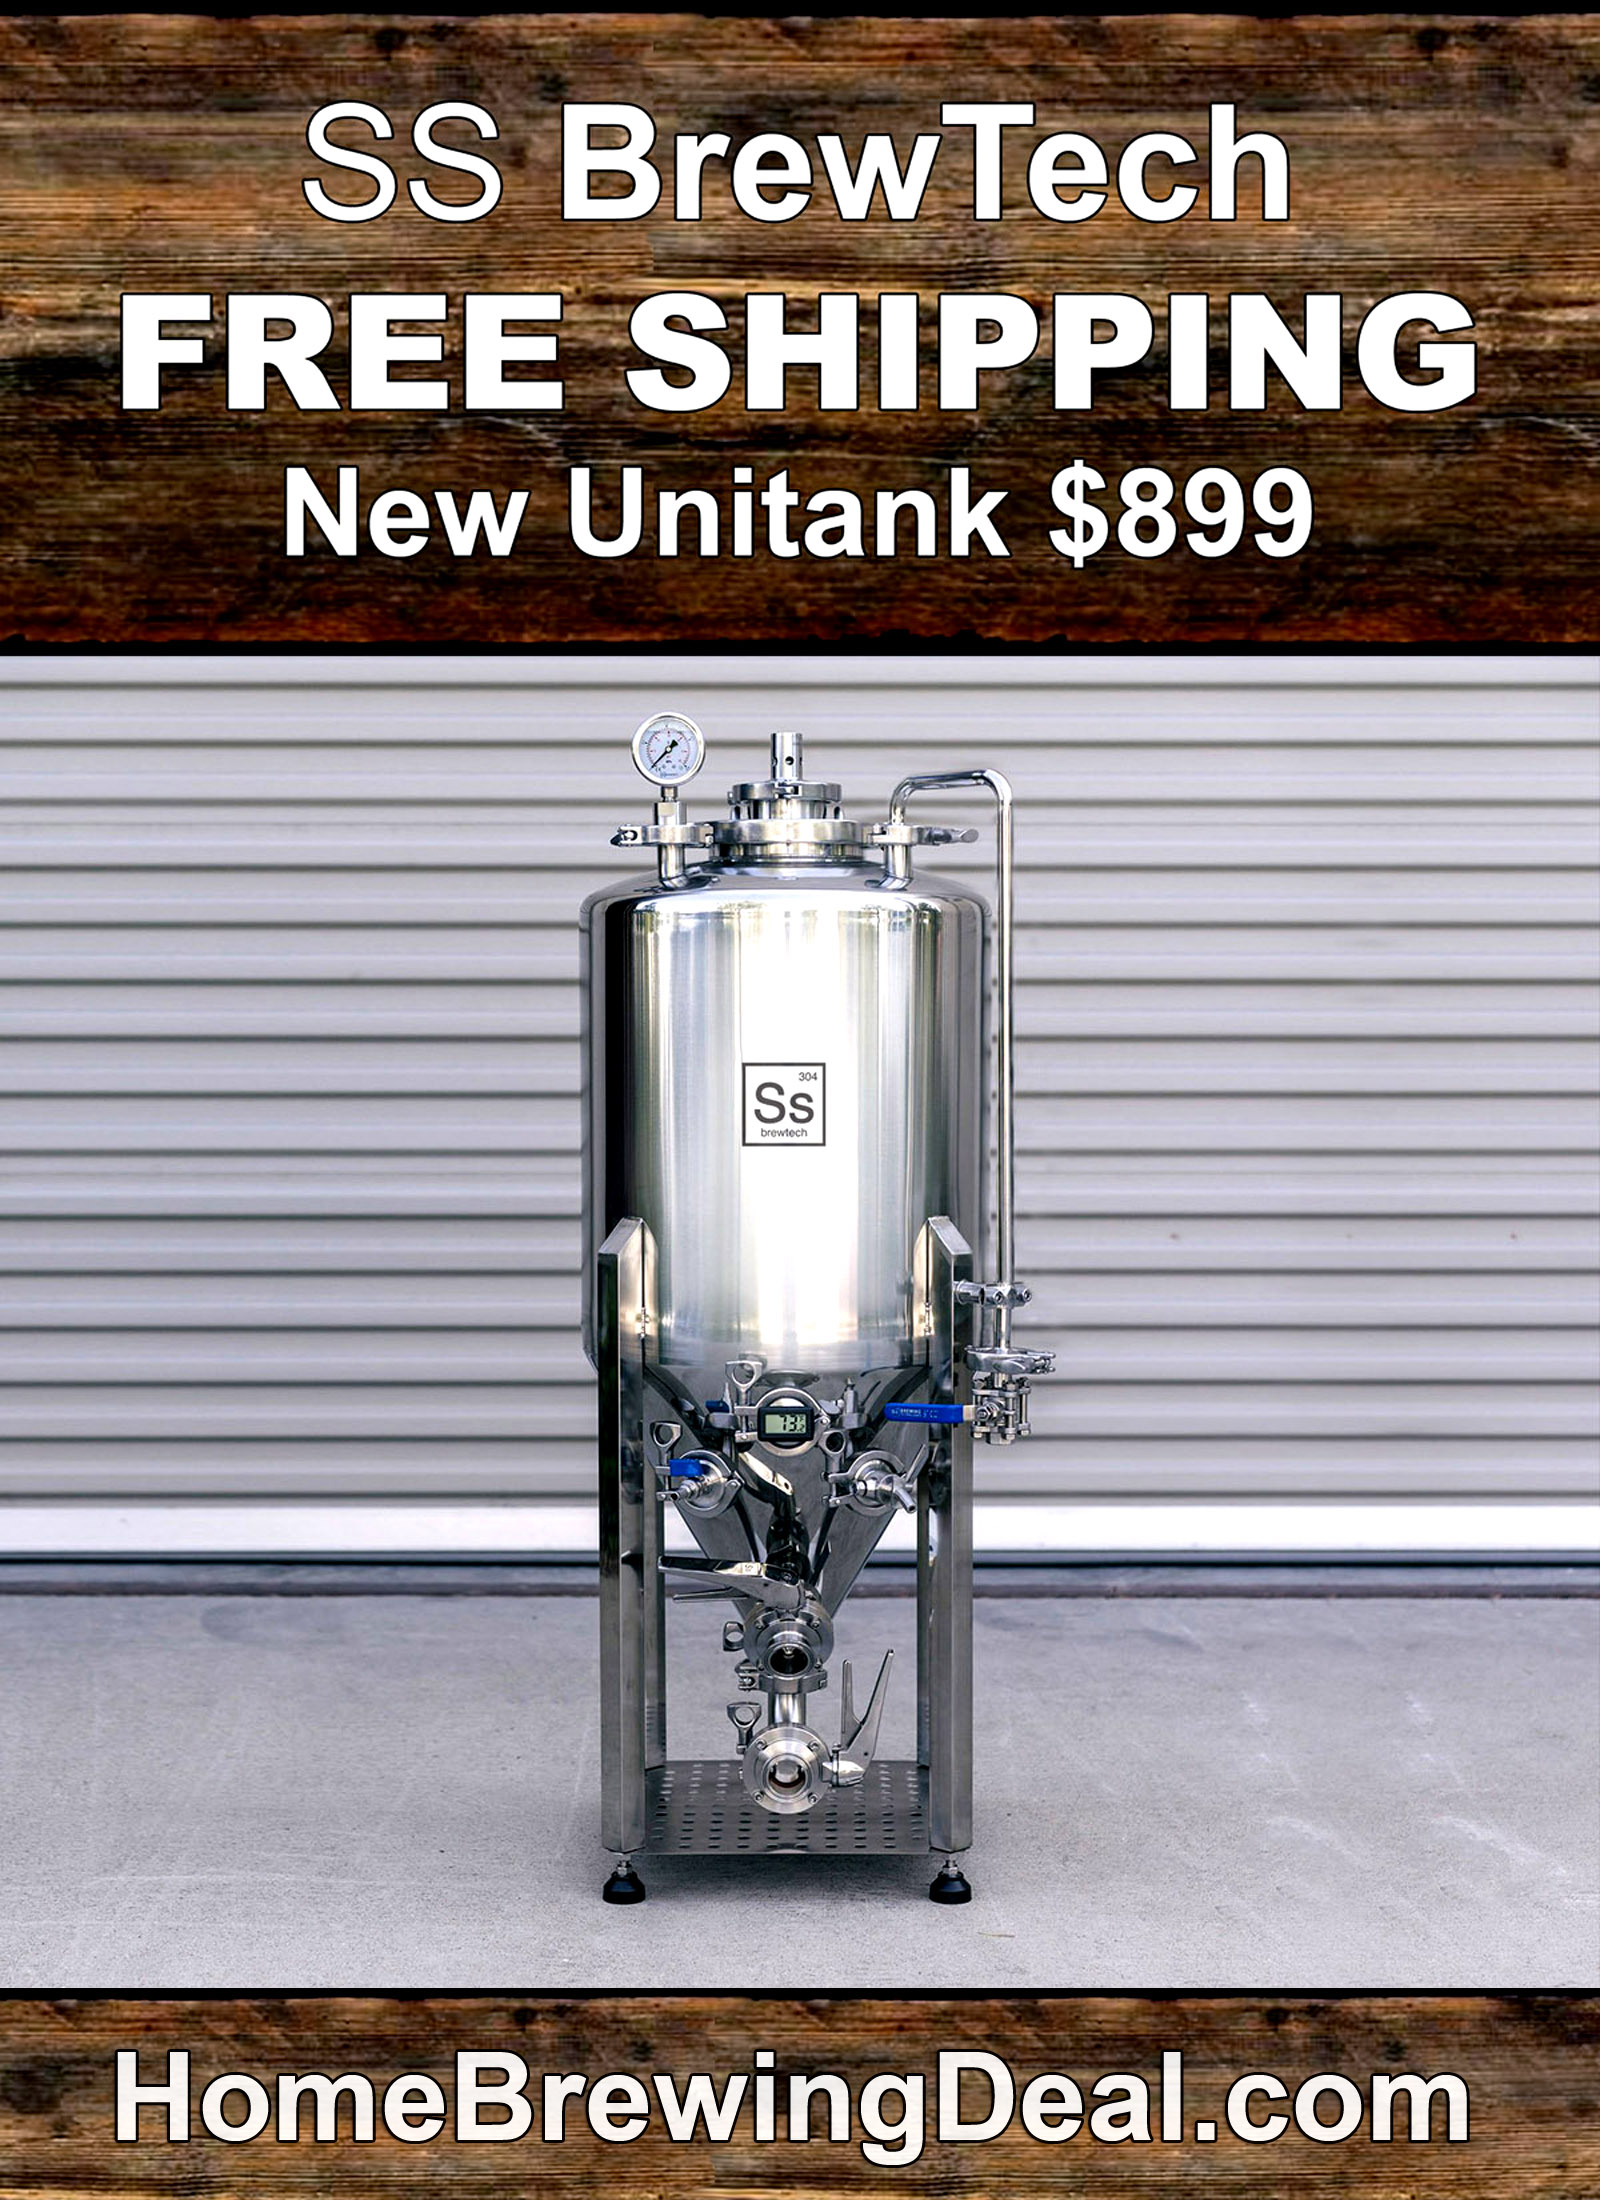  Coupon Code For Get a NEW SS BrewTech Unitank for $899 and Free Shipping Coupon Code